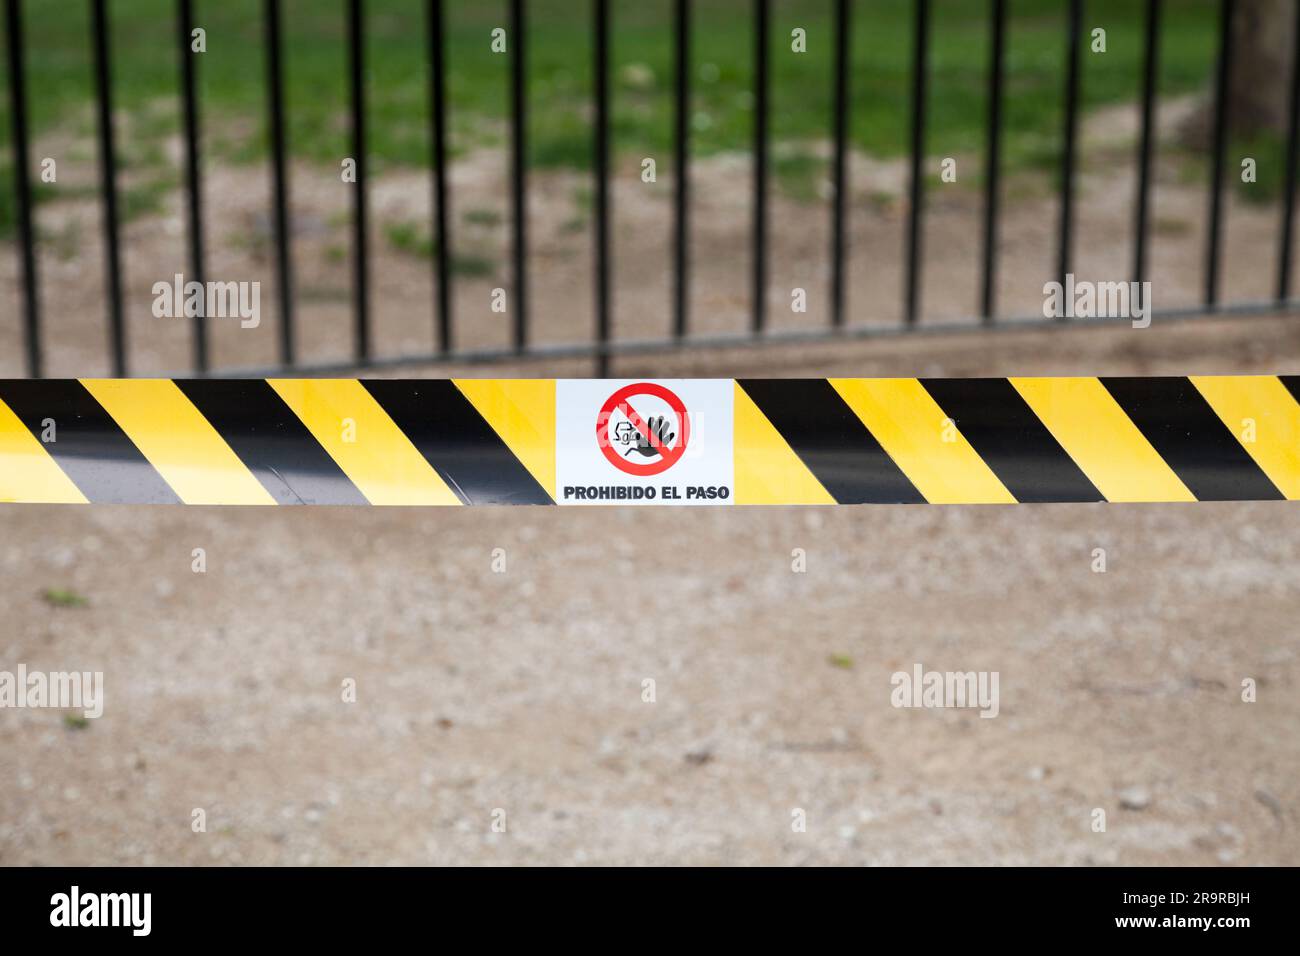 Yellow and black striped tape with a no entrance sign with written bellow in spanish 'Prohibido el paso' meaning in Englist 'No entry'. Stock Photo